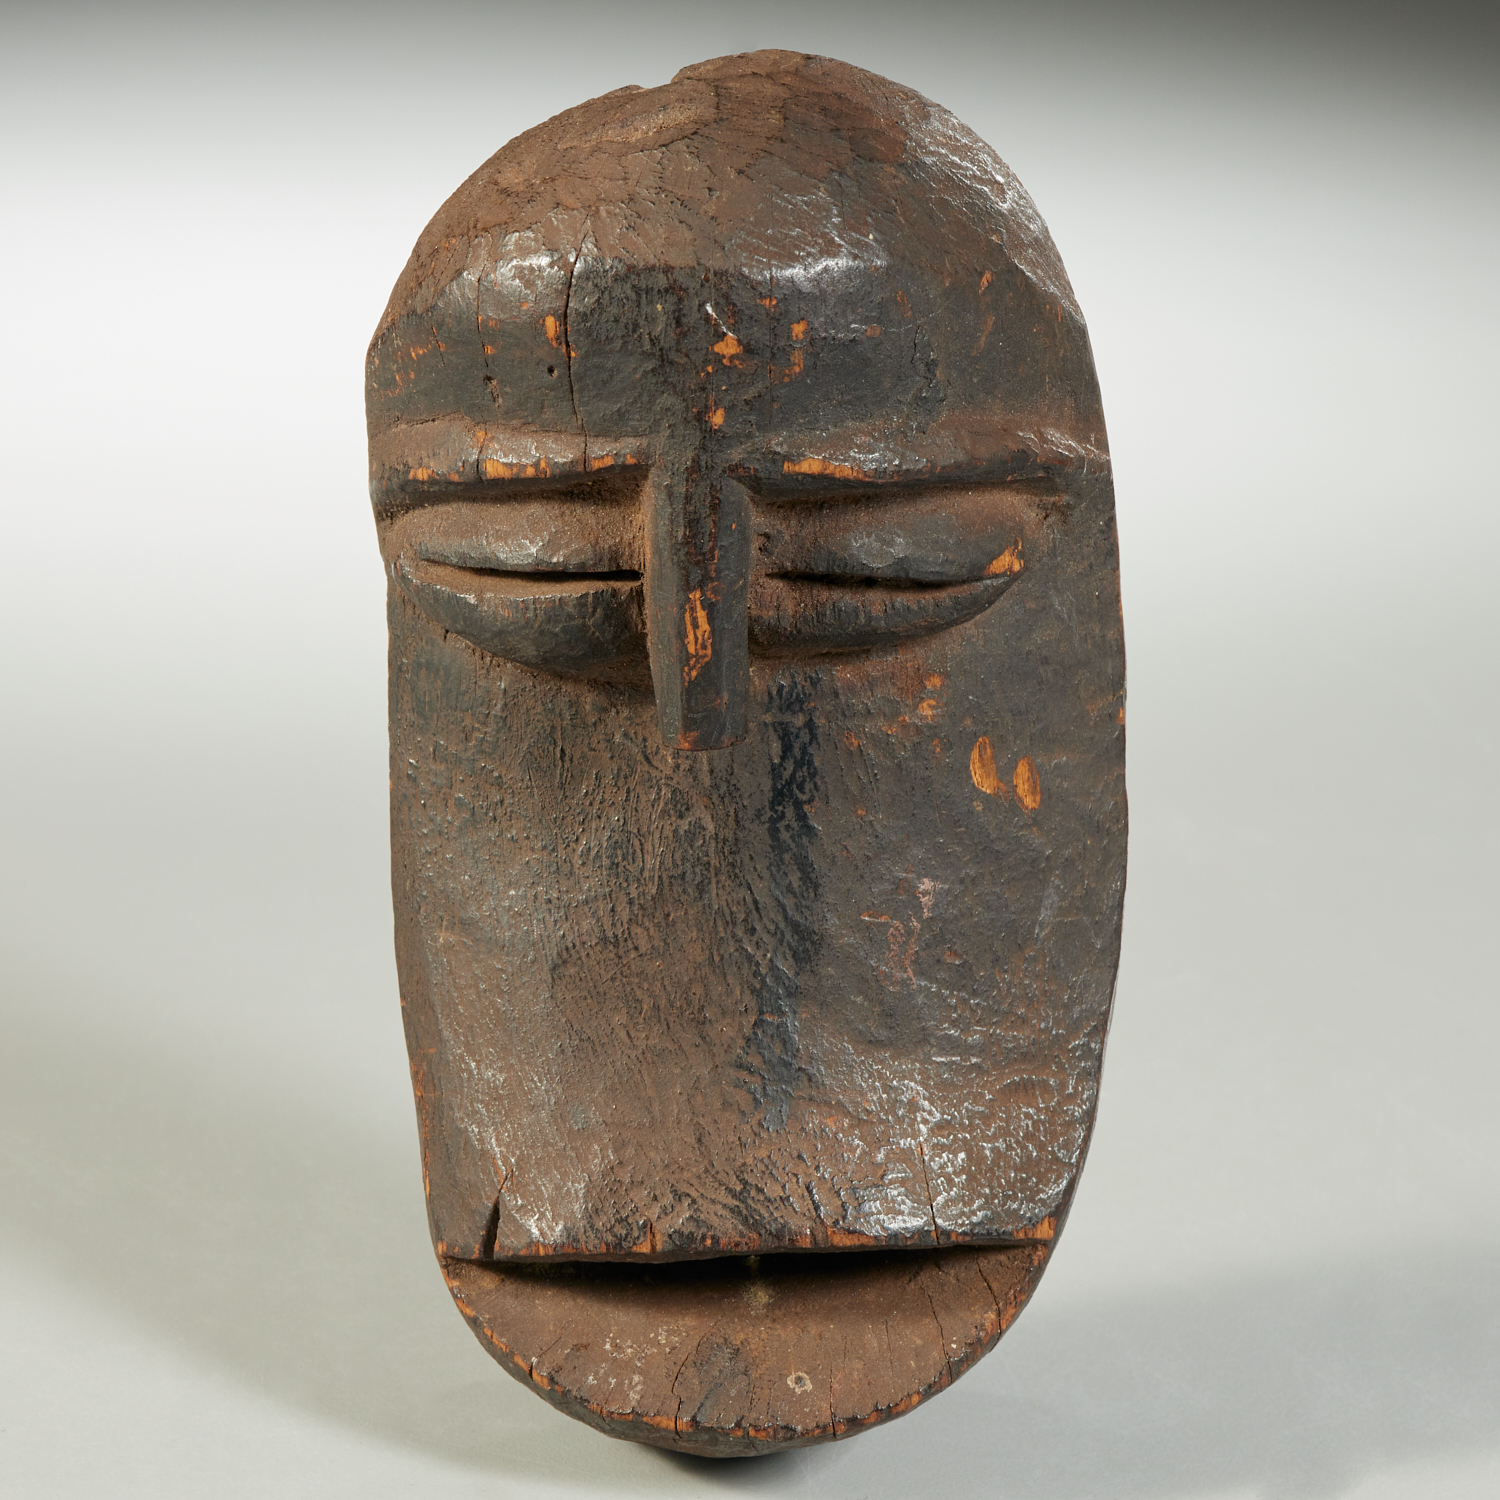 HEMBA PEOPLES CARVED MONKEY MASK  36141c